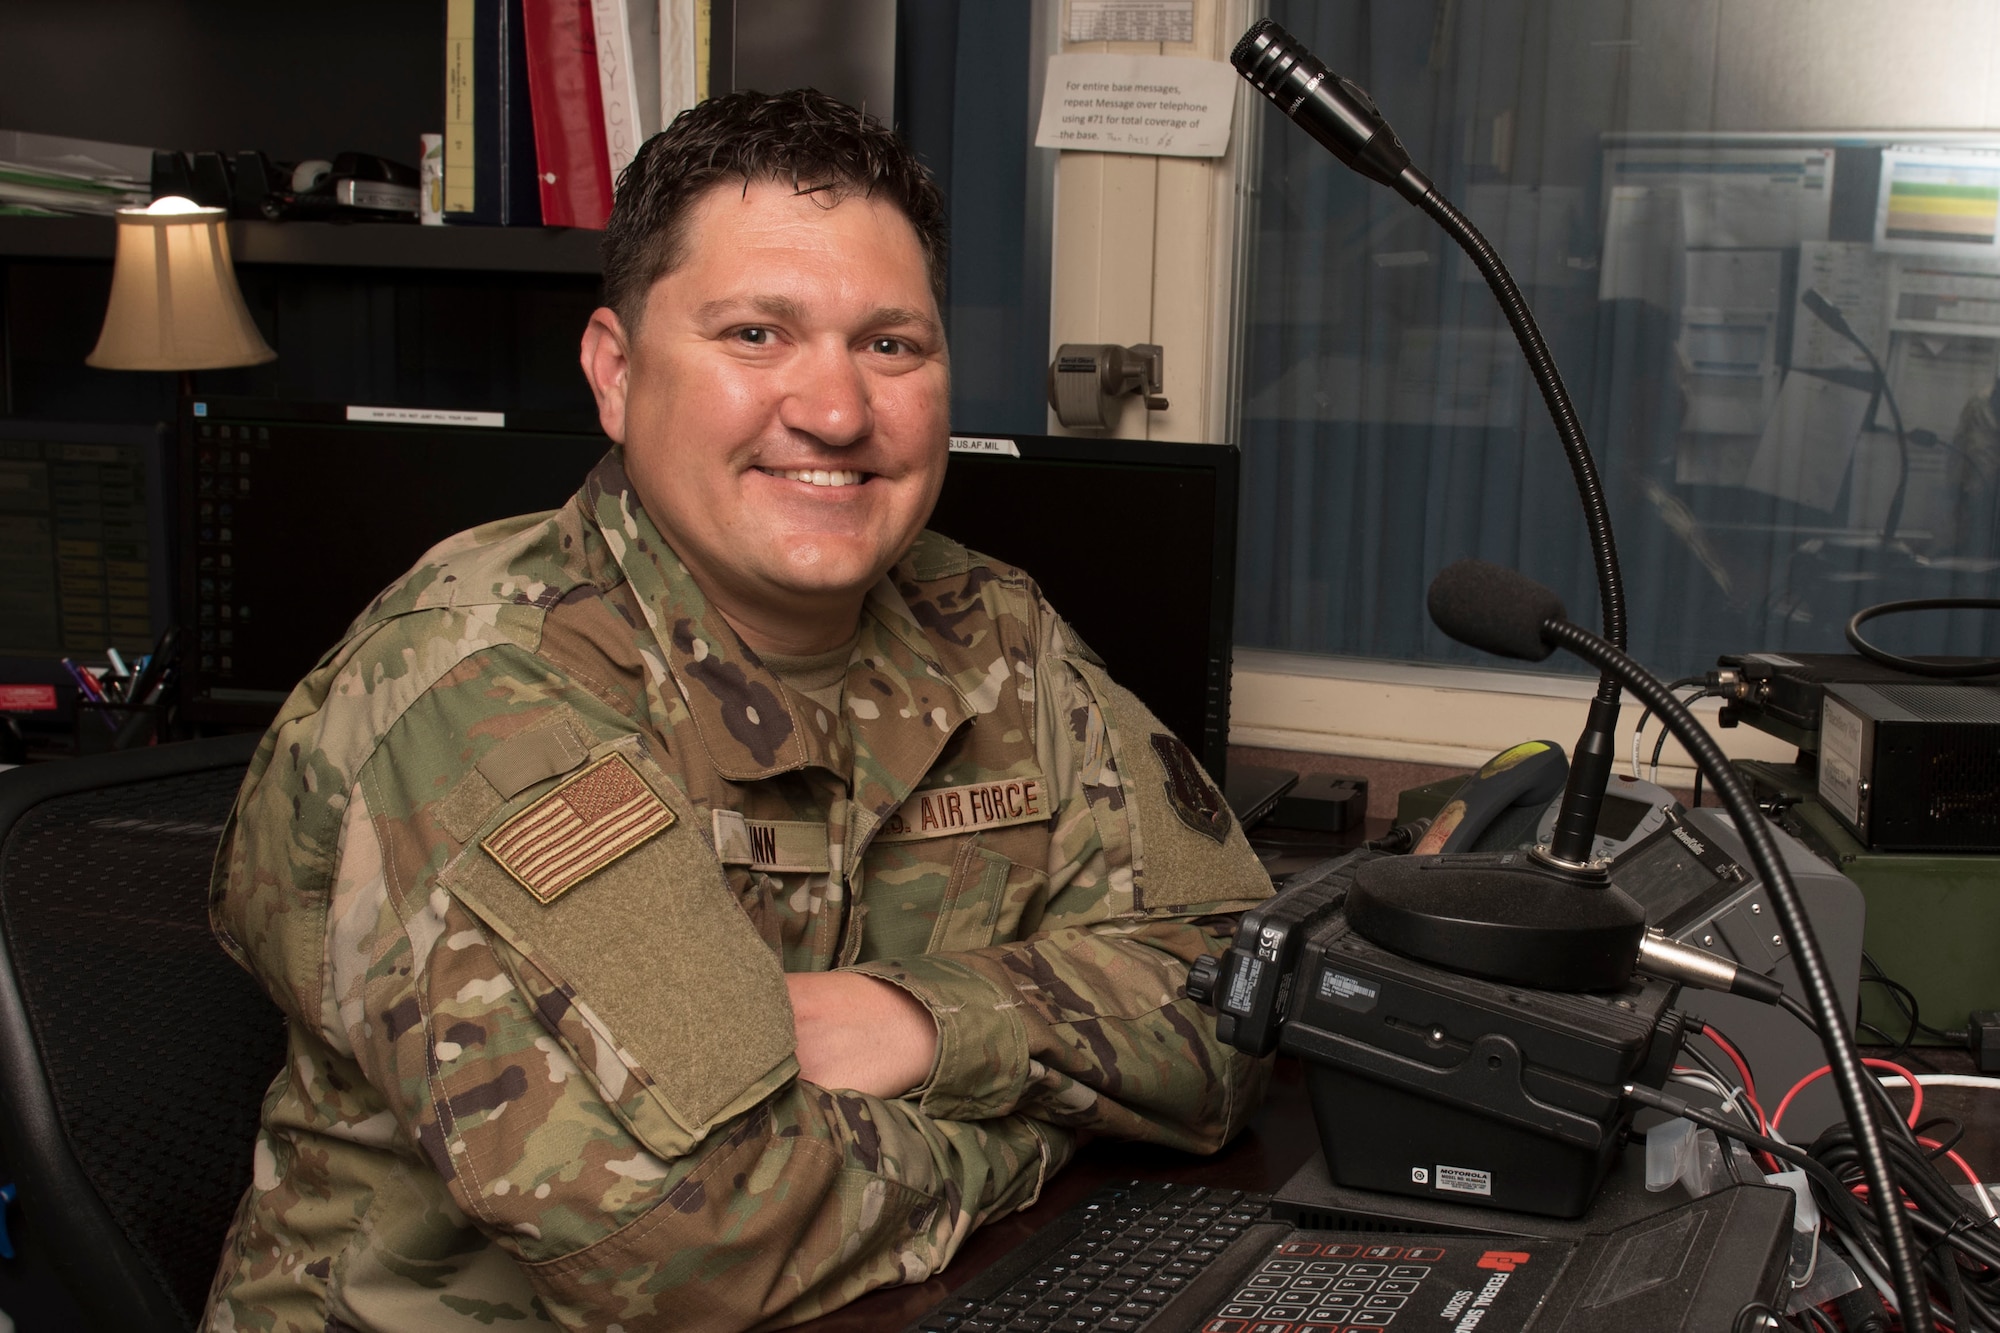 Technical Sgt. Christopher Dunn is a command and control operations specialist for the 167th Airlift Wing and the 167th AW Airman Spotlight for June 2021.